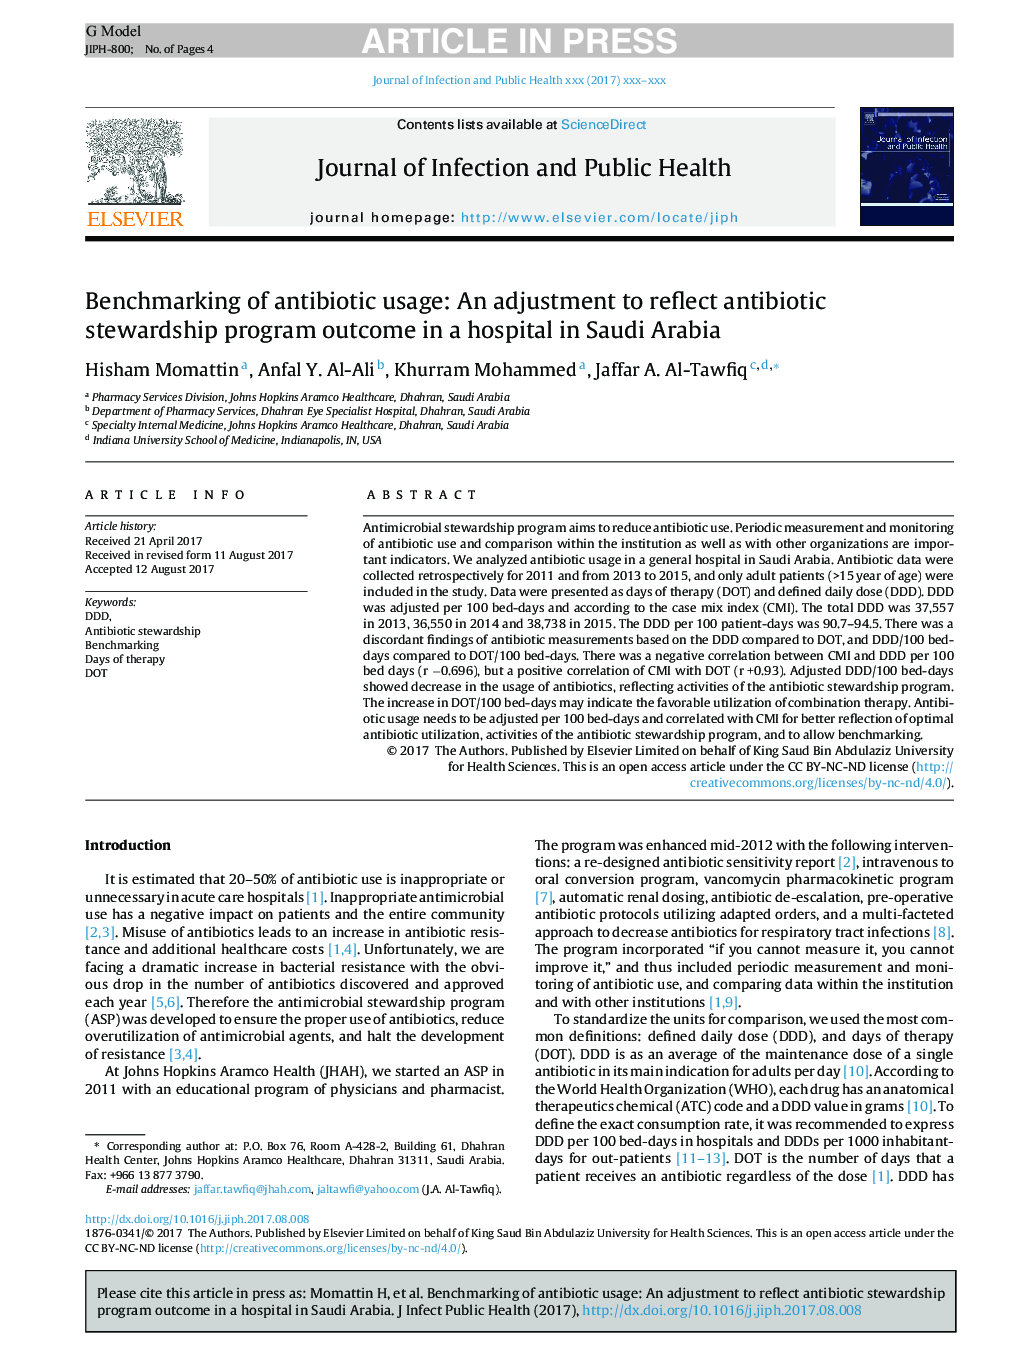 Benchmarking of antibiotic usage: An adjustment to reflect antibiotic stewardship program outcome in a hospital in Saudi Arabia